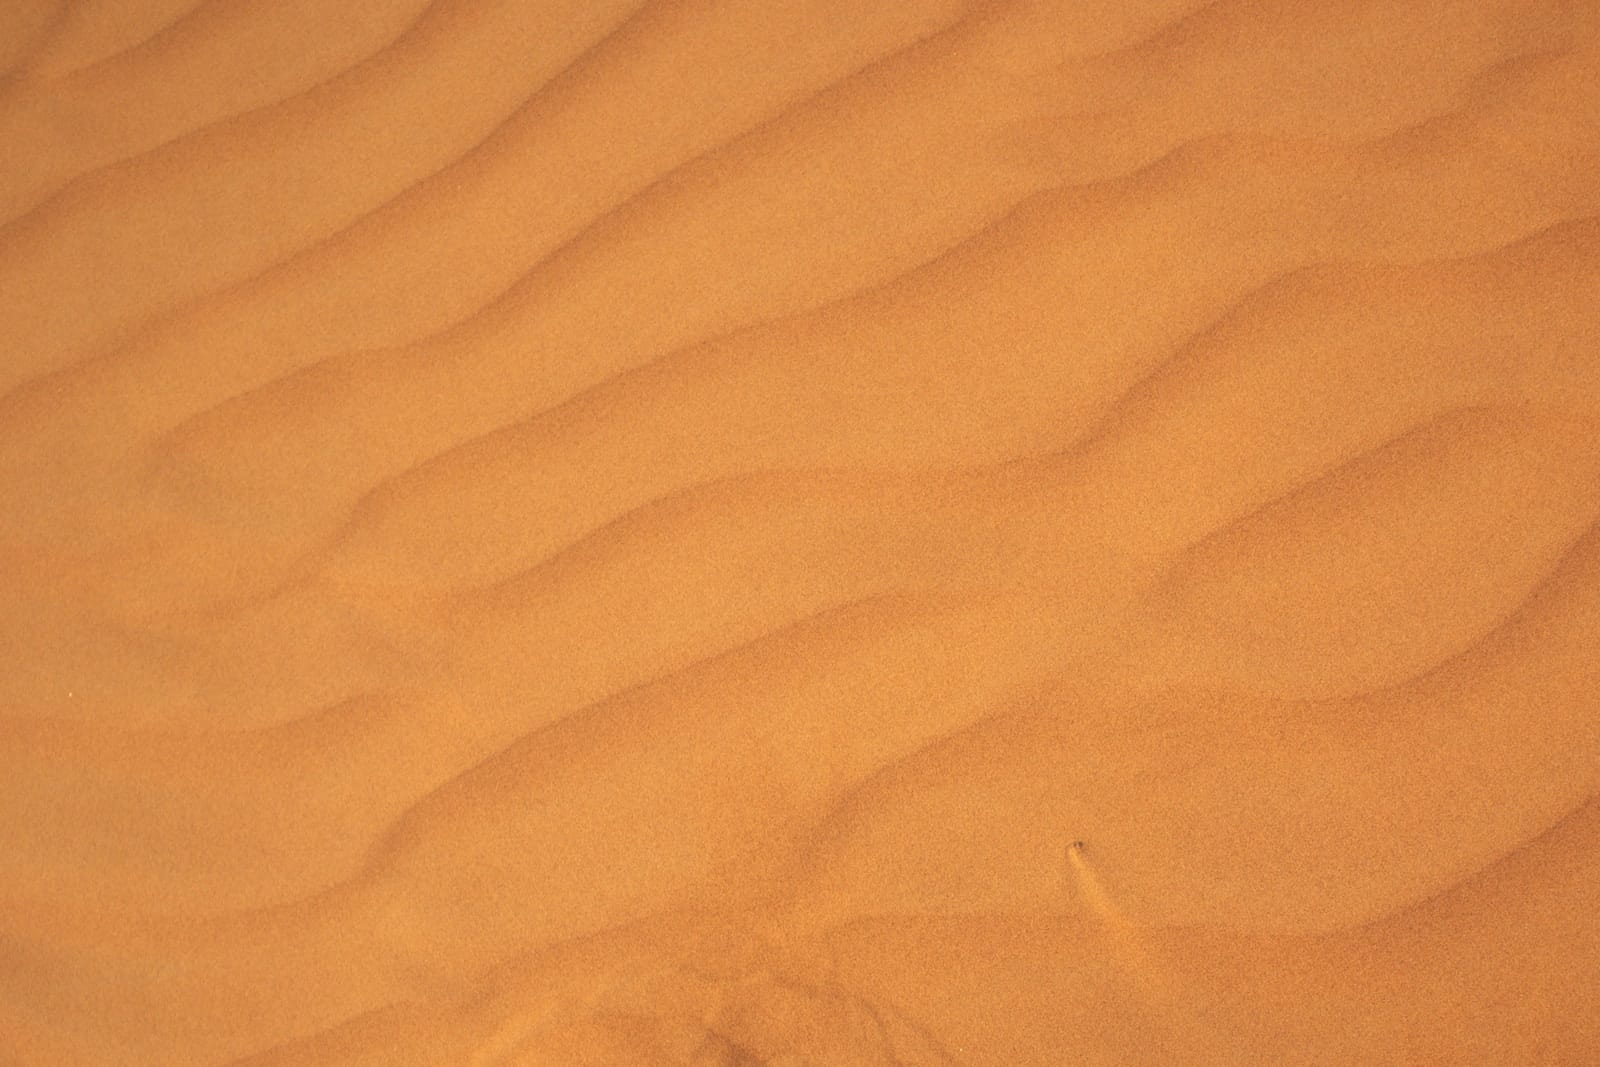 a person's feet in the sand of a desert